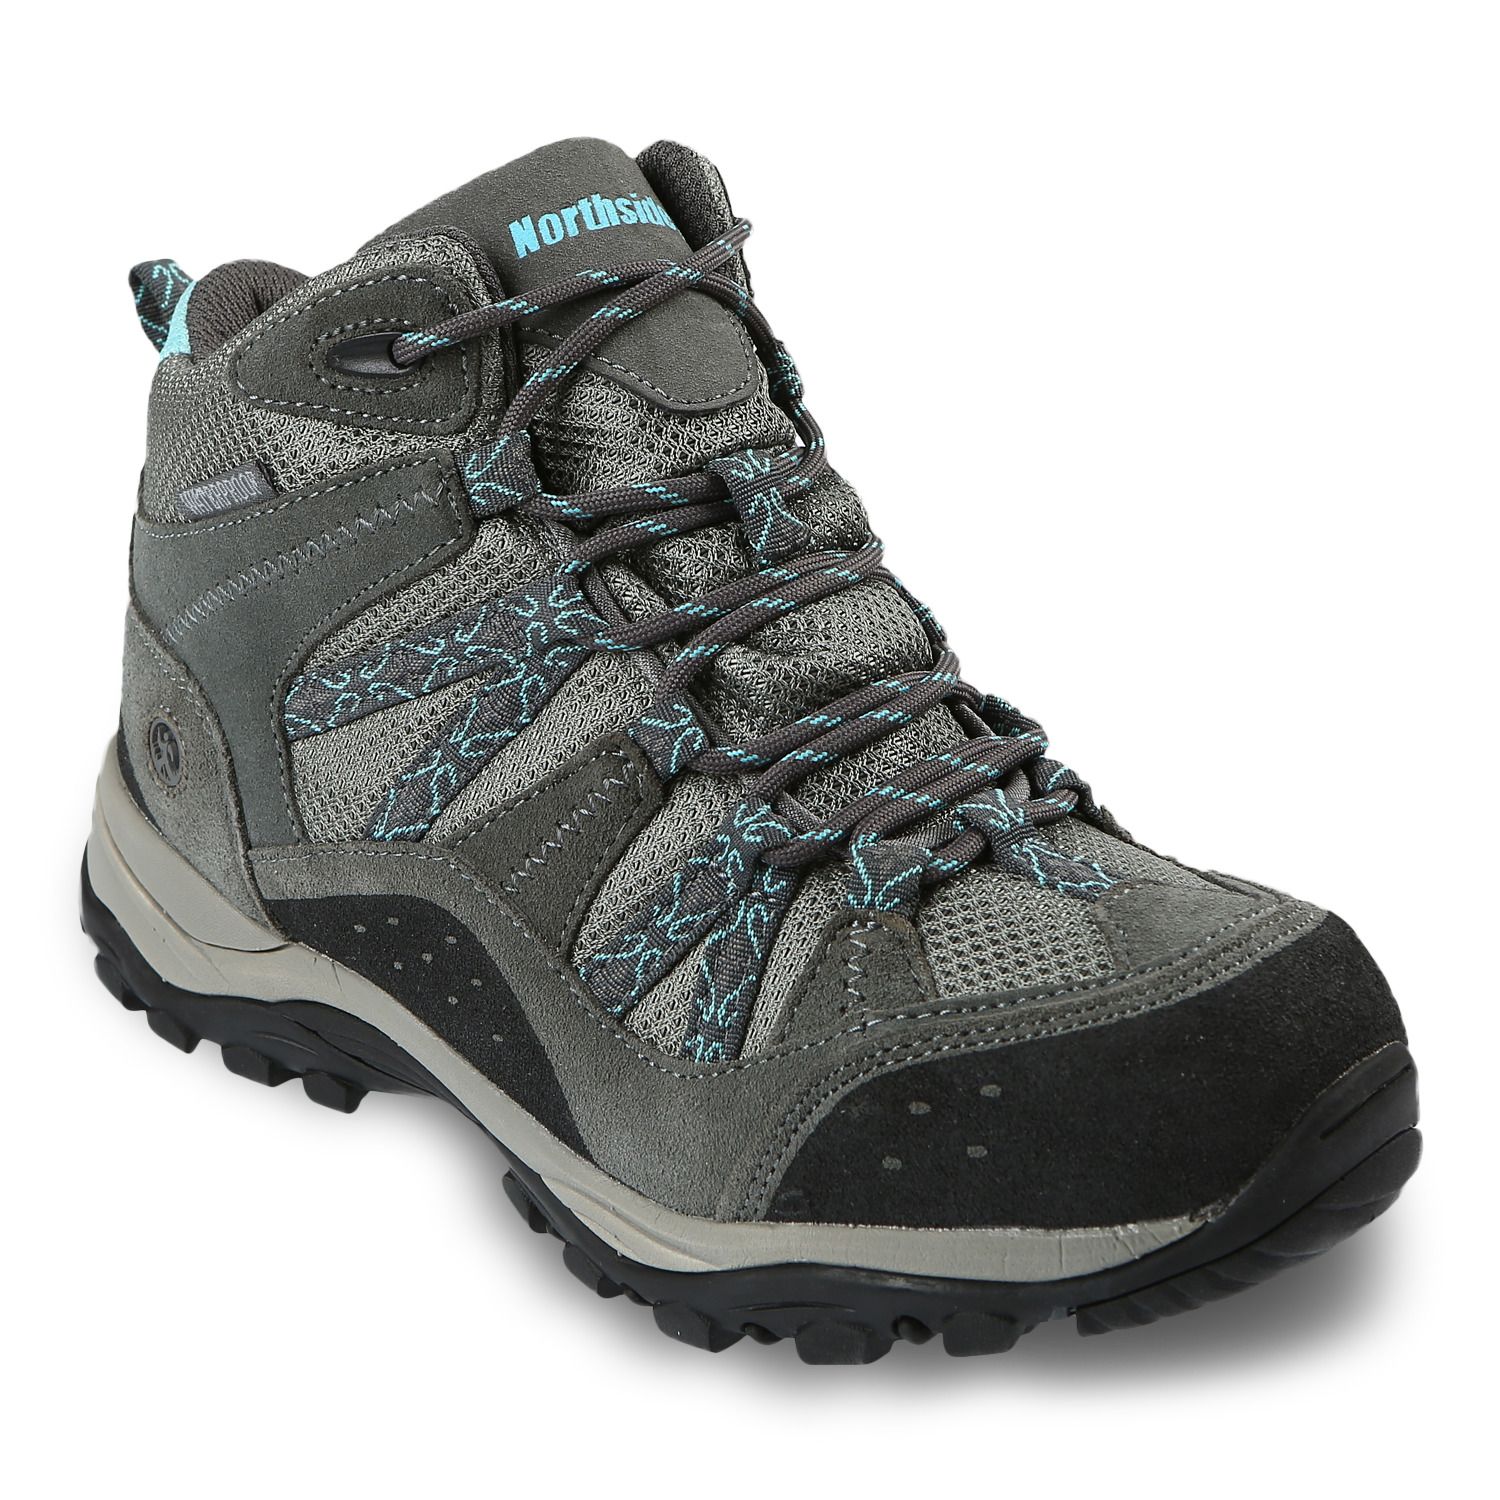 hiking boots for women near me